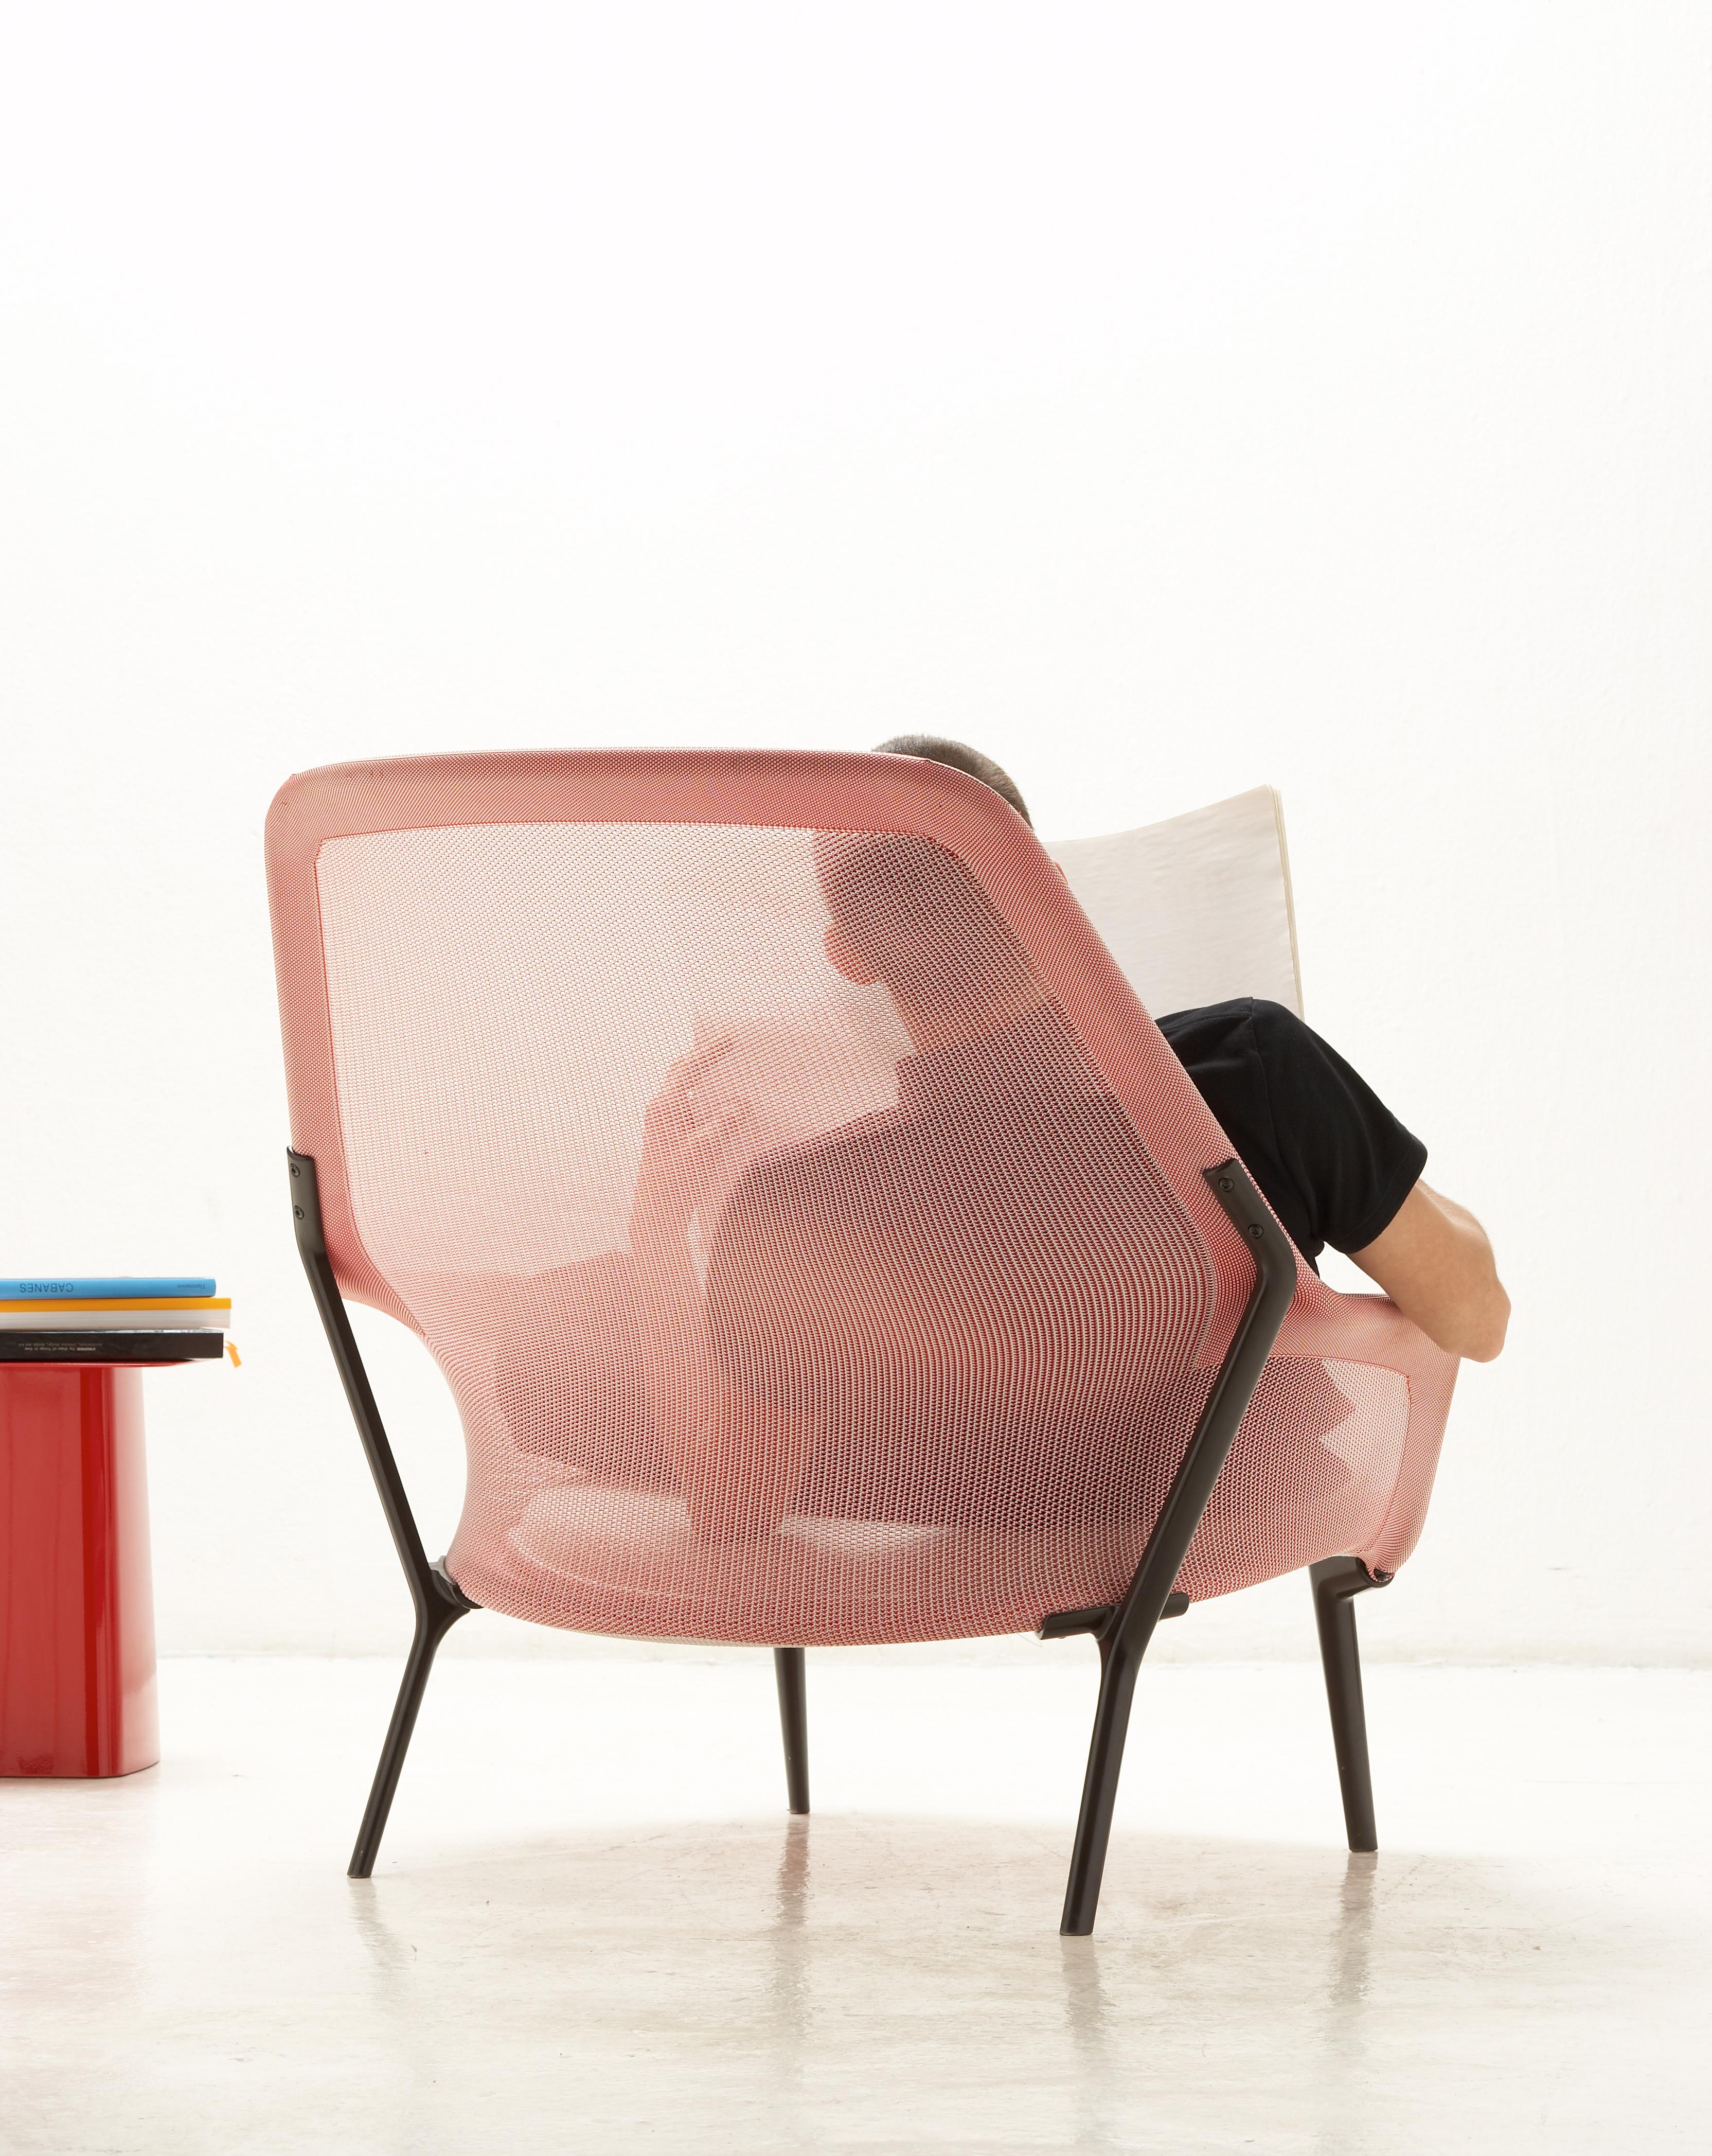 Modern Vitra Slow Chair in Red and Cream by Ronan & Erwan Bouroullec For Sale